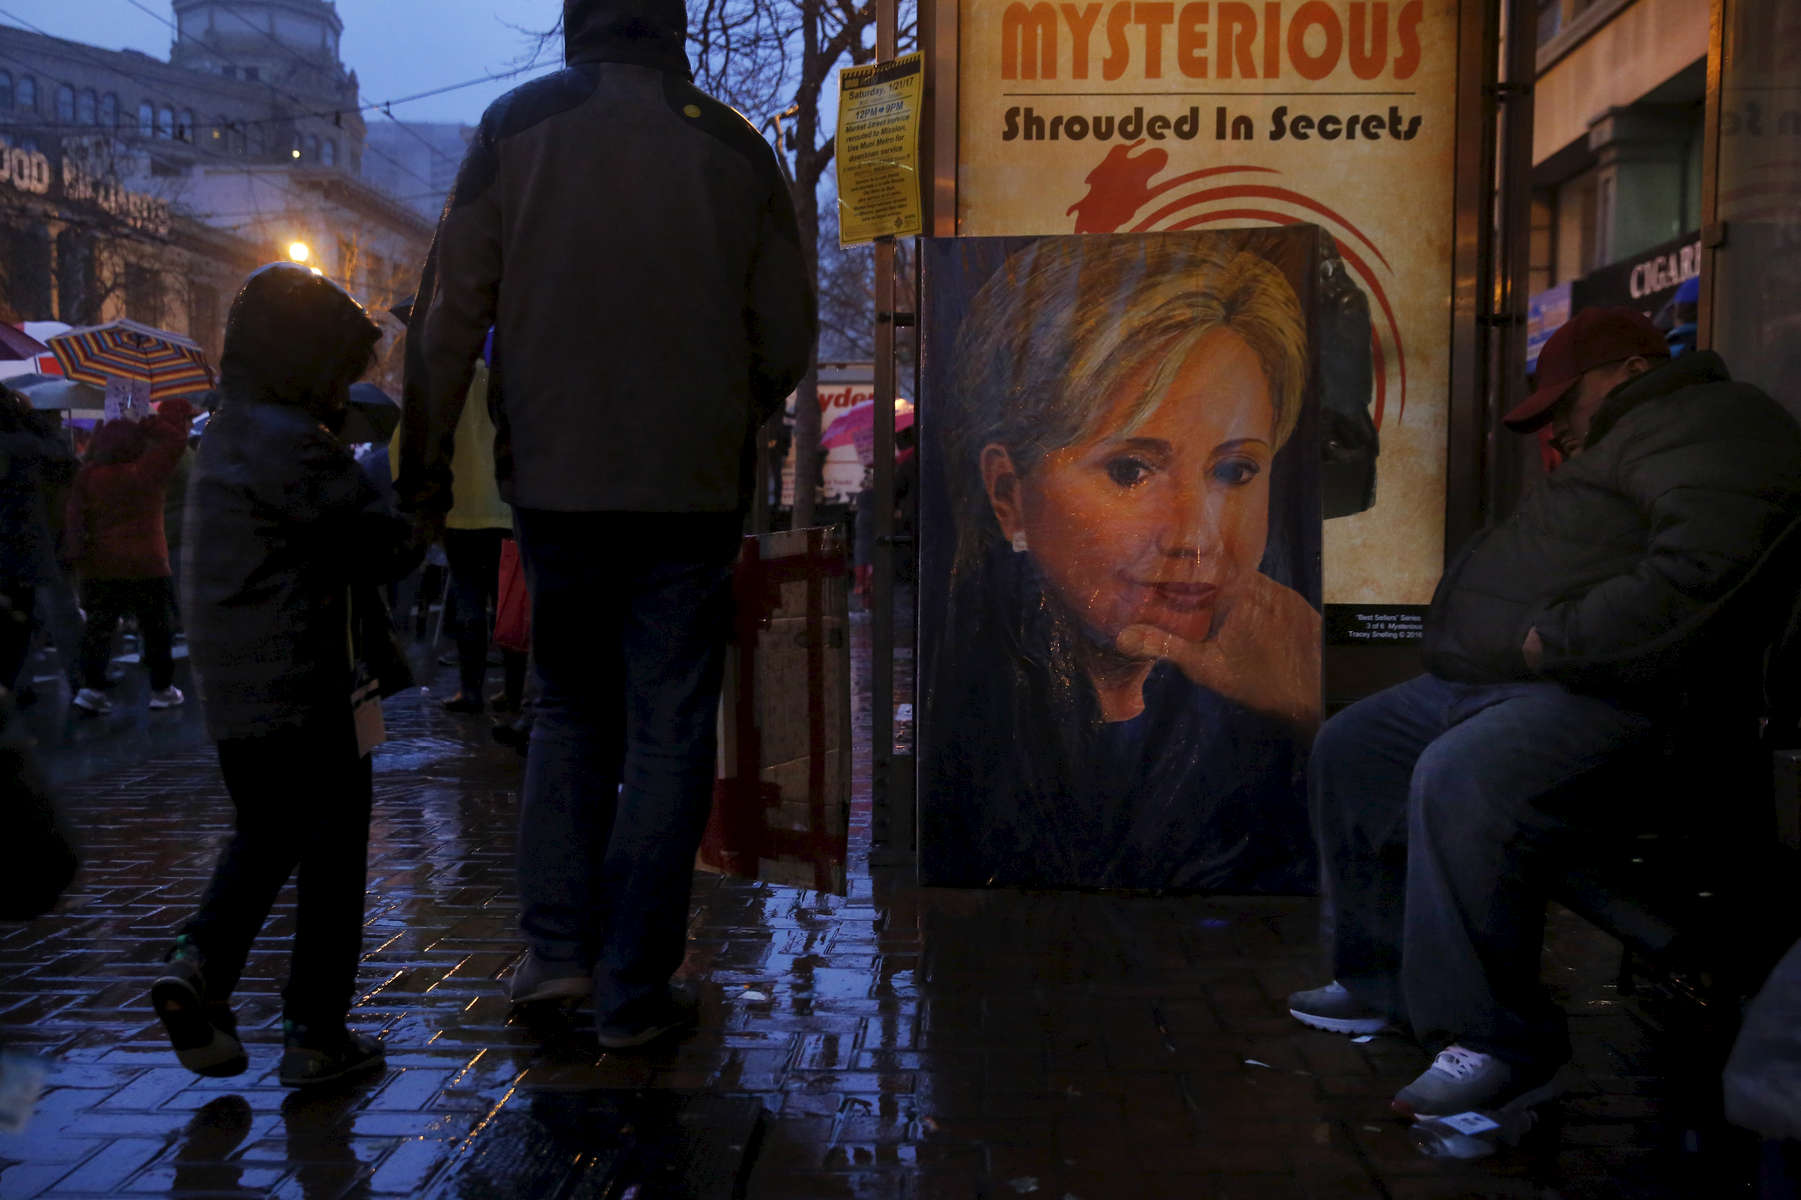 A portrait of Hillary Clinton sits at a bus stop as protesters stream past on Market street during the Women's March Jan. 21, 2017 in San Francisco, Calif. Thousands gathered in San Francisco to march in solidarity with the Women's March on Washington D.C. to protest the presidency of Donald J. Trump and to rally for the rights of all races, classes and gender identities.